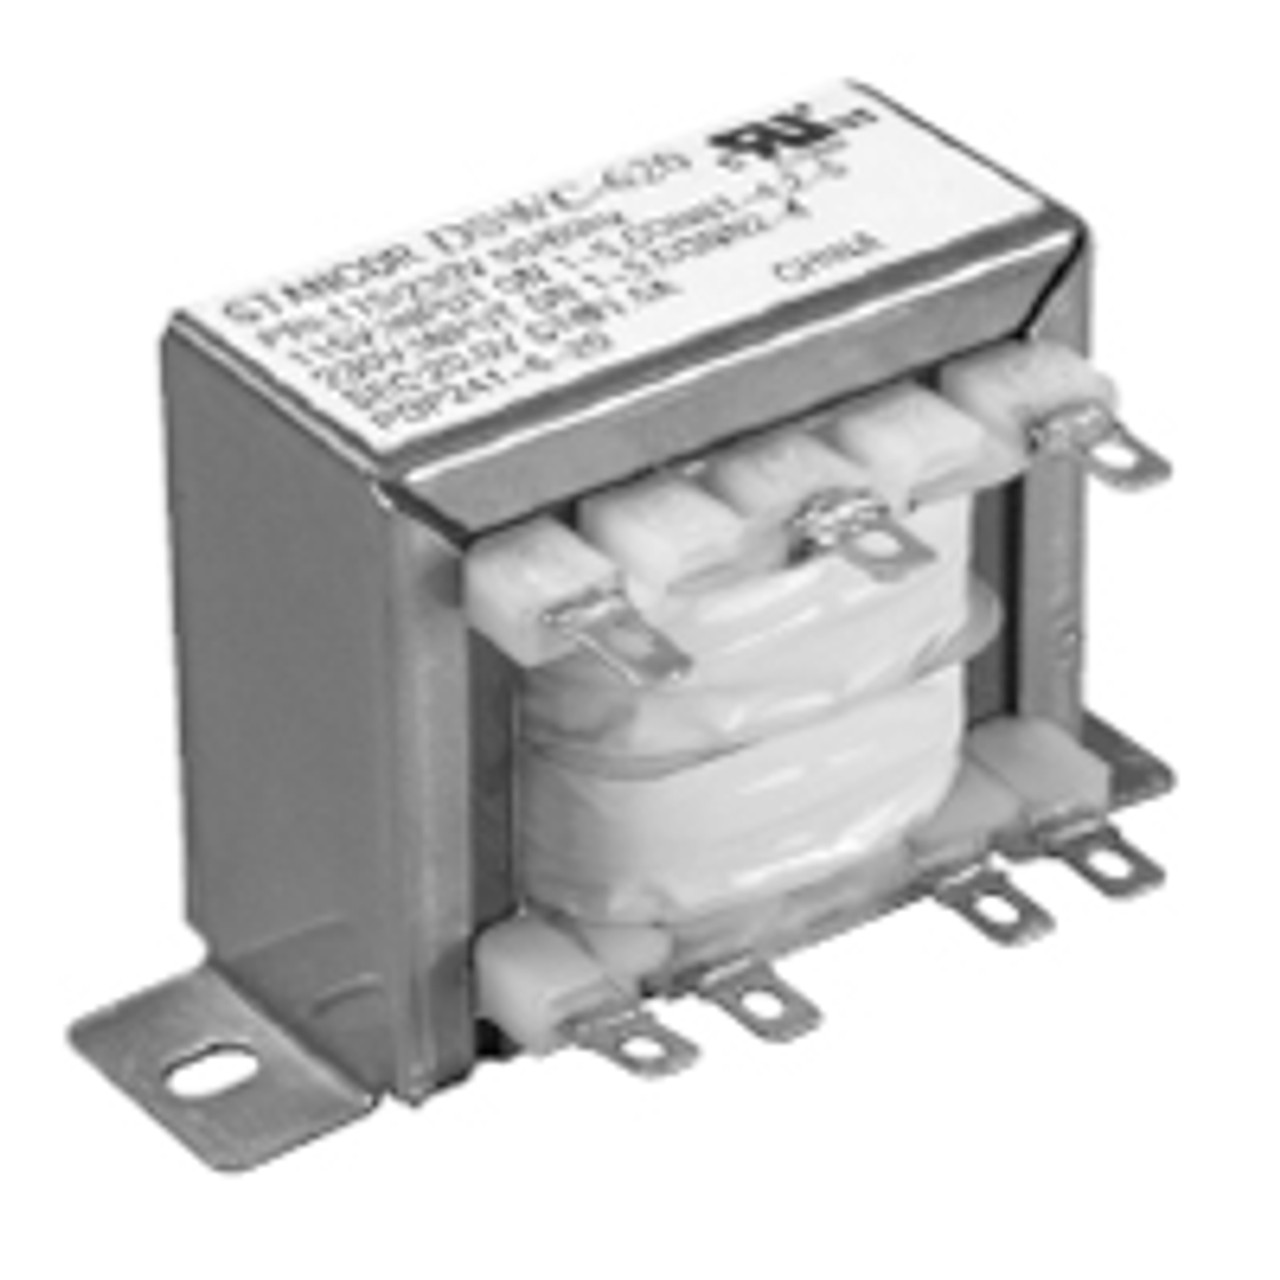 Stancor / White Rodgers DSWC-612 Chassis Mount Power Transformers